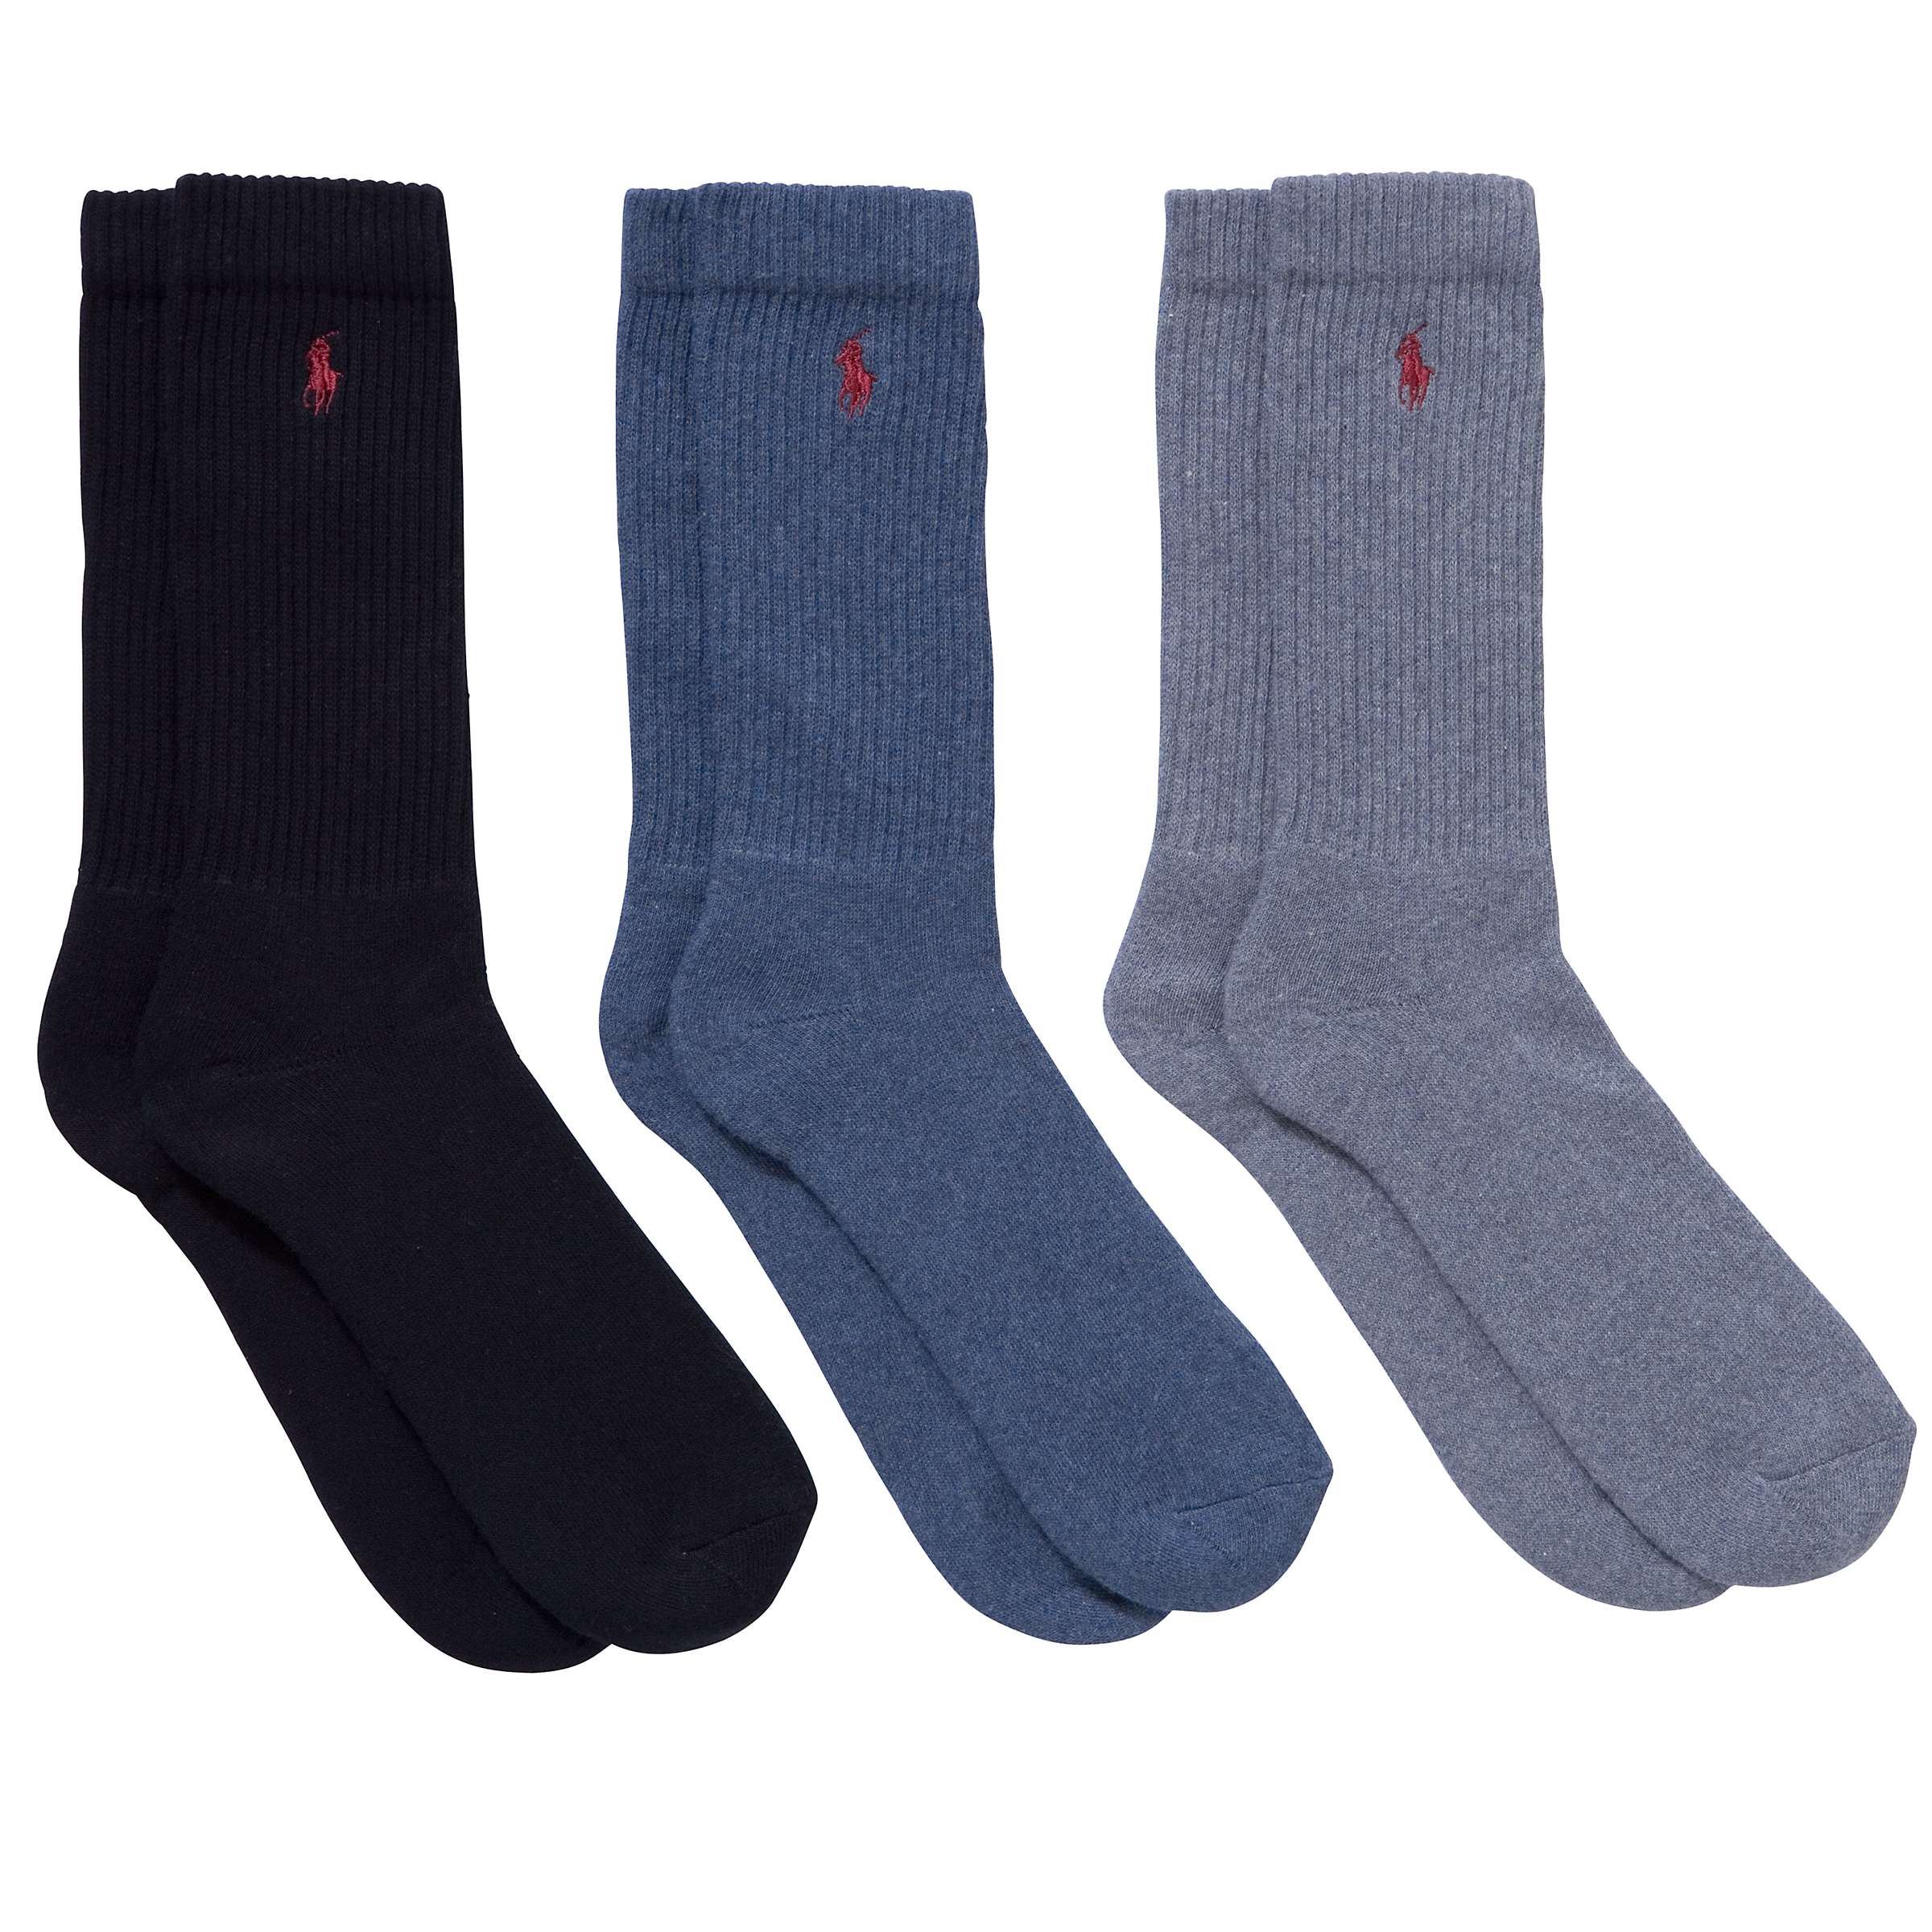 Buy Polo Ralph Lauren Classic Crew Socks, Pack of 3, One Size, Multi Online at johnlewis.com